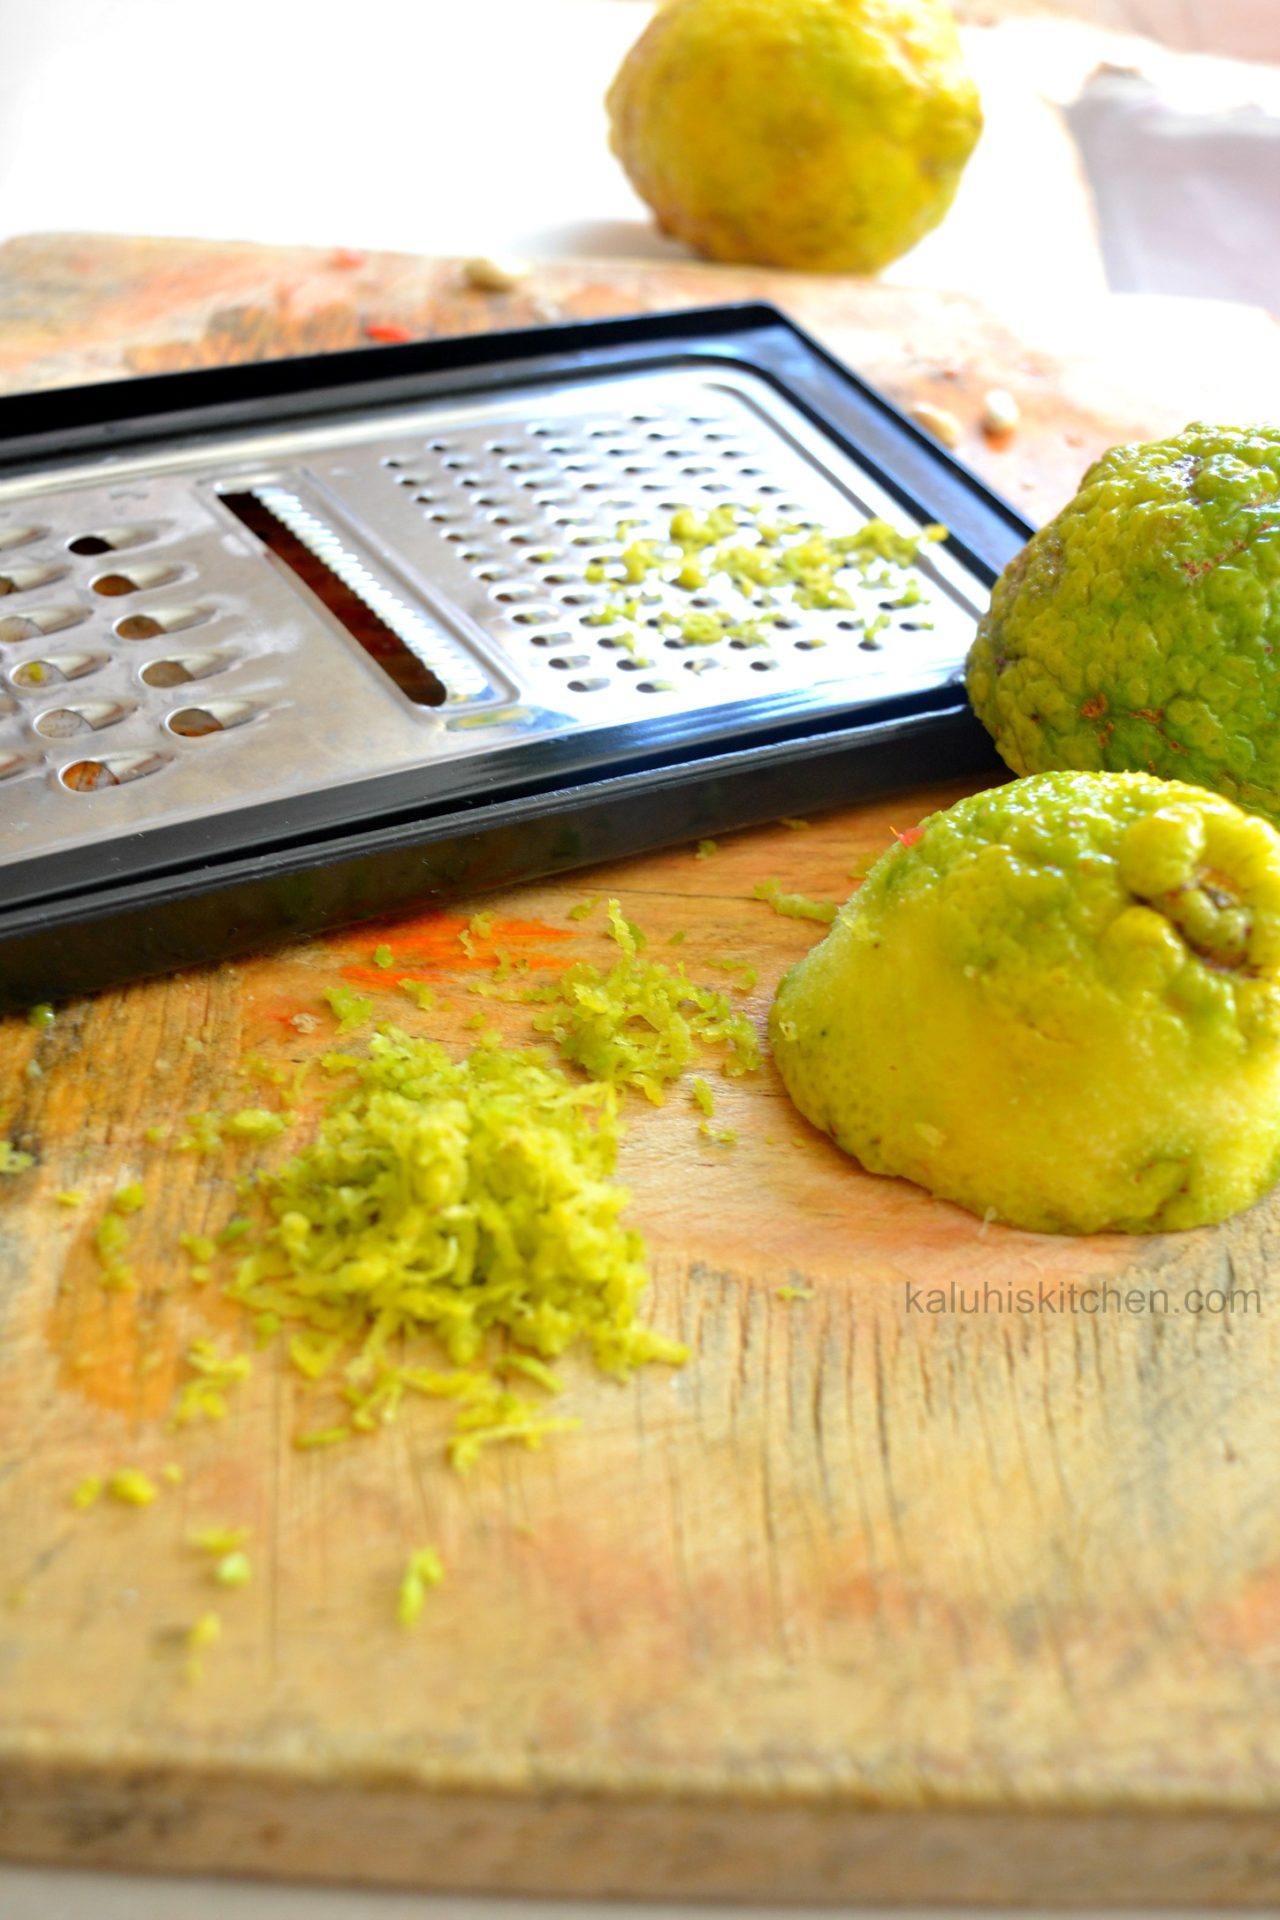 lemon zest intensifies the taste of lemon in the omena making this dish very delicious and palatable_kaluhiskitchen.com_best kenyan food blog_food bloggers in kenya